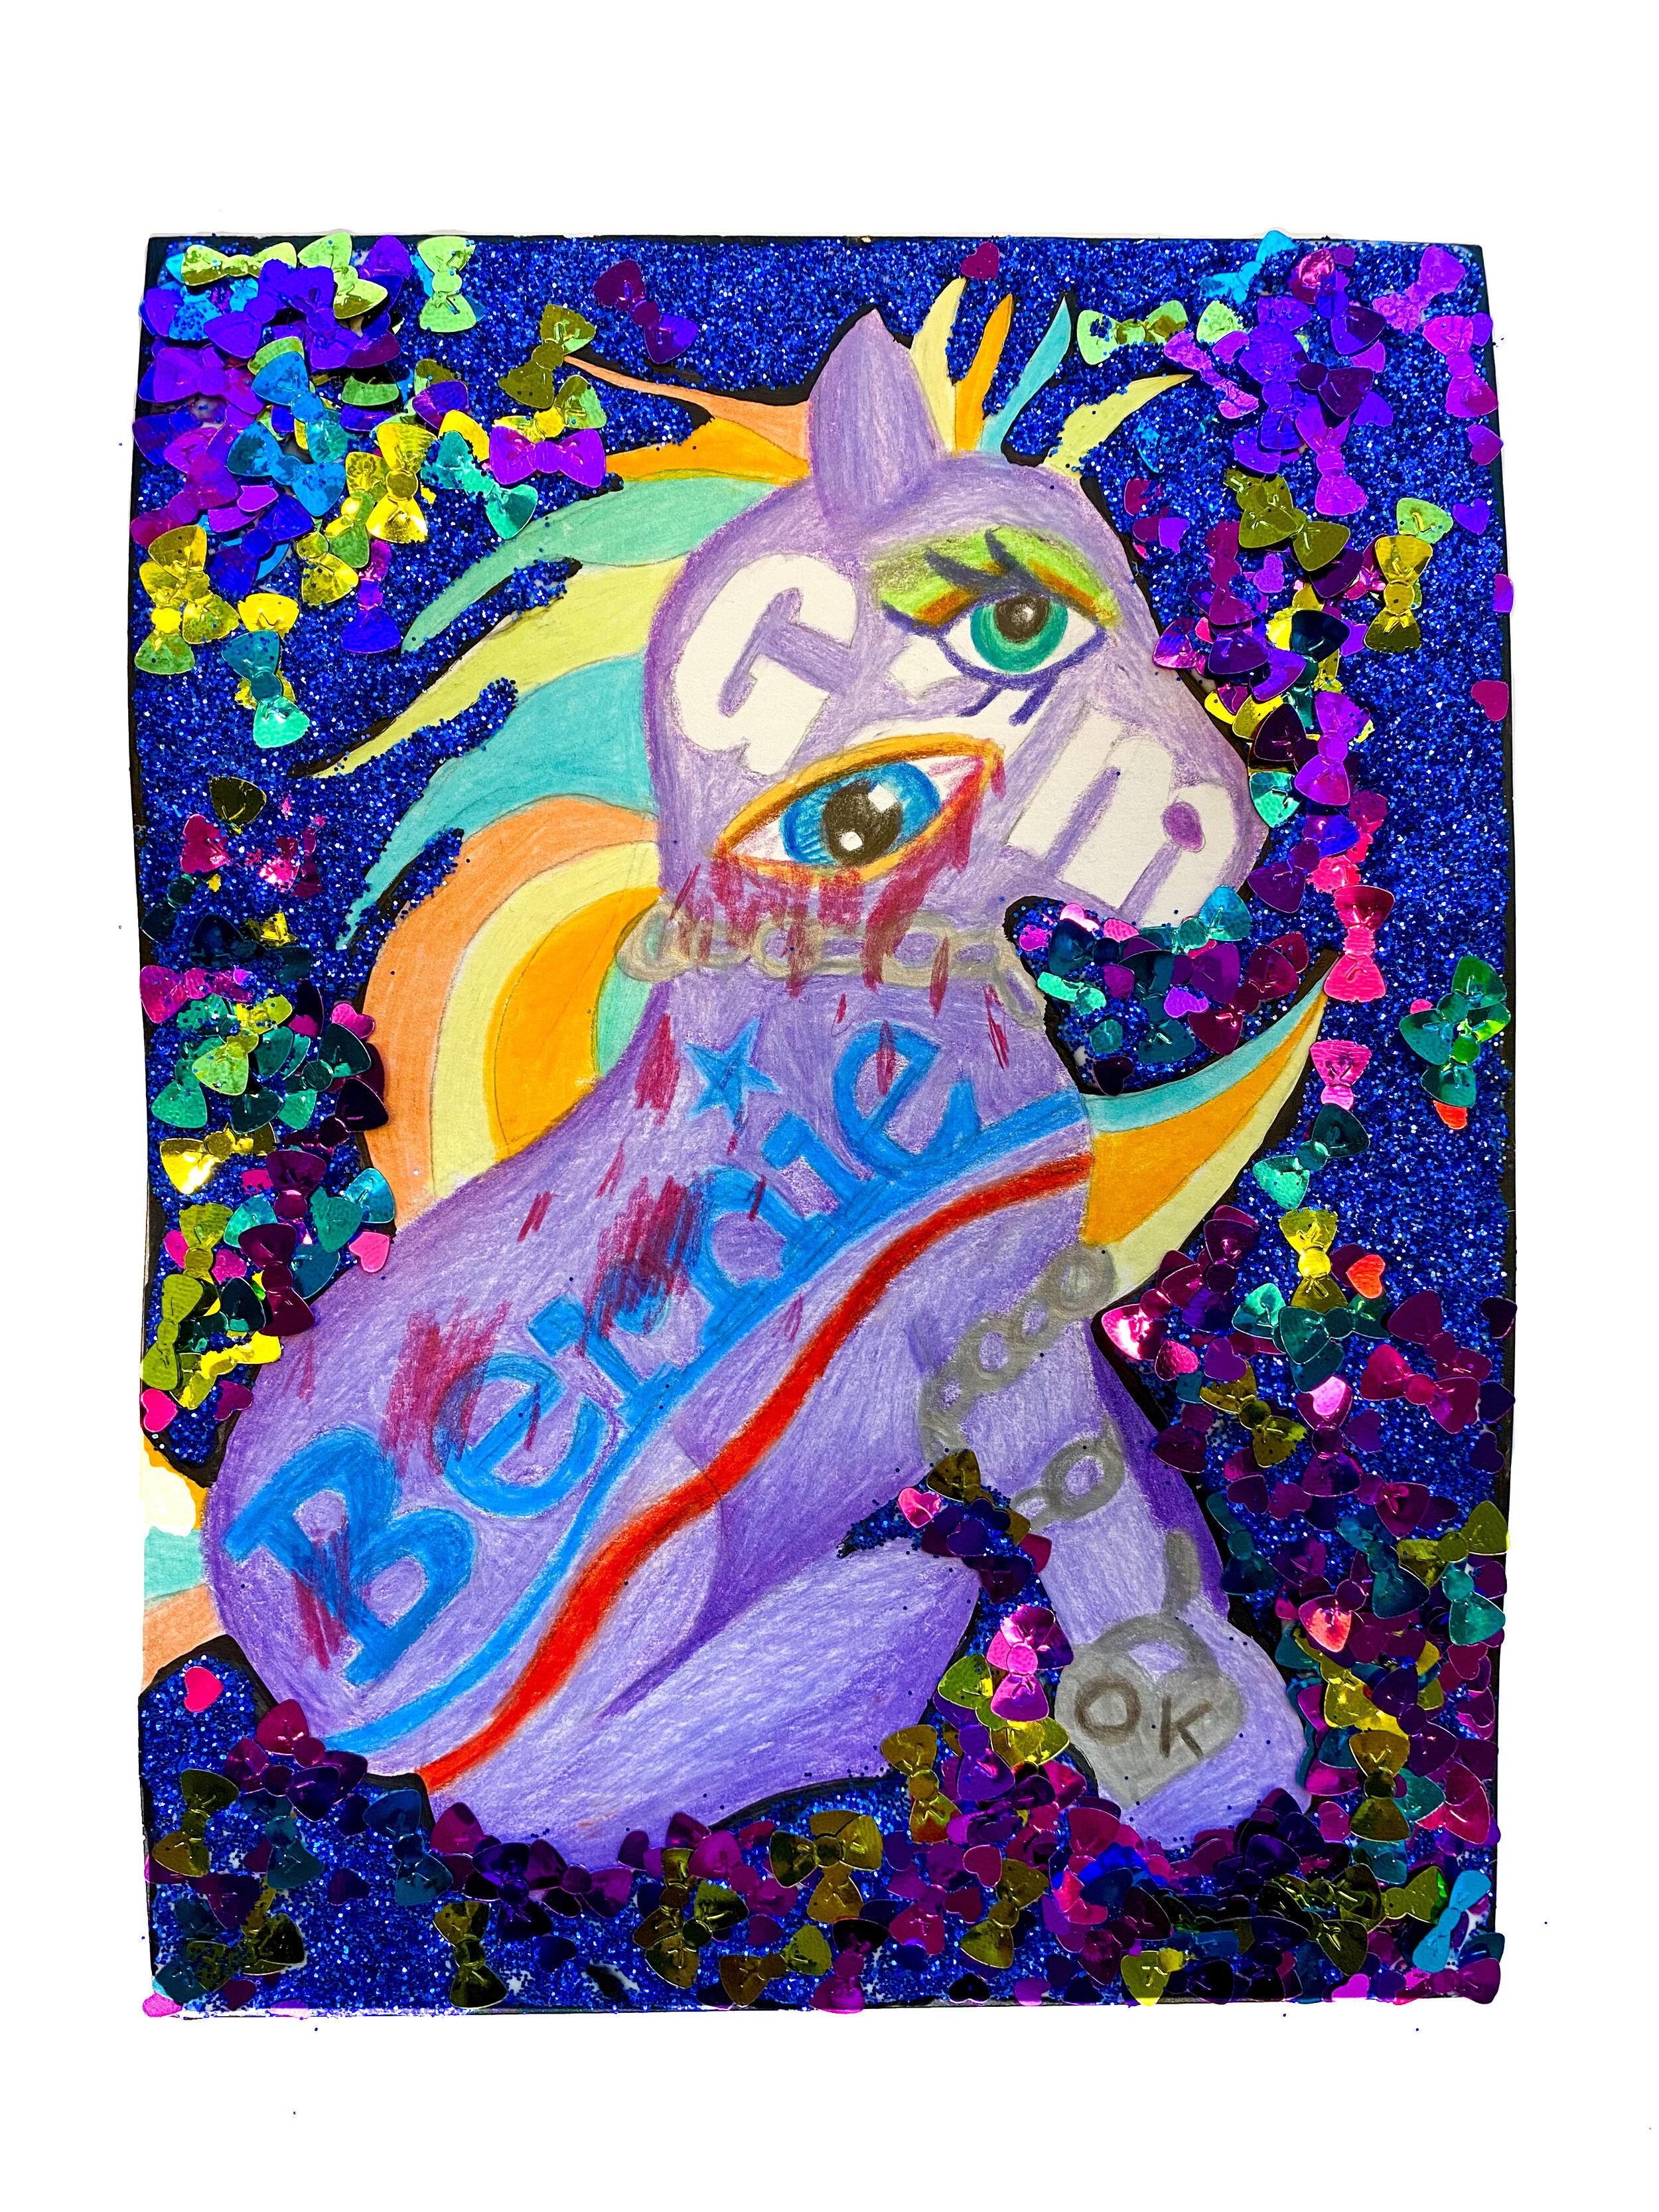   Ashamed Girls Pony #2 (Bernie and Gamestop Body Paint with Mysterious Eye Crying Blood) , 2021  8 x 6 inches (20.32 x 15.24 cm.)  Colored pencil, acrylic paint, Elmer's glue, Modge Podge, Hello Kitty Confetti, and glitter on paper 